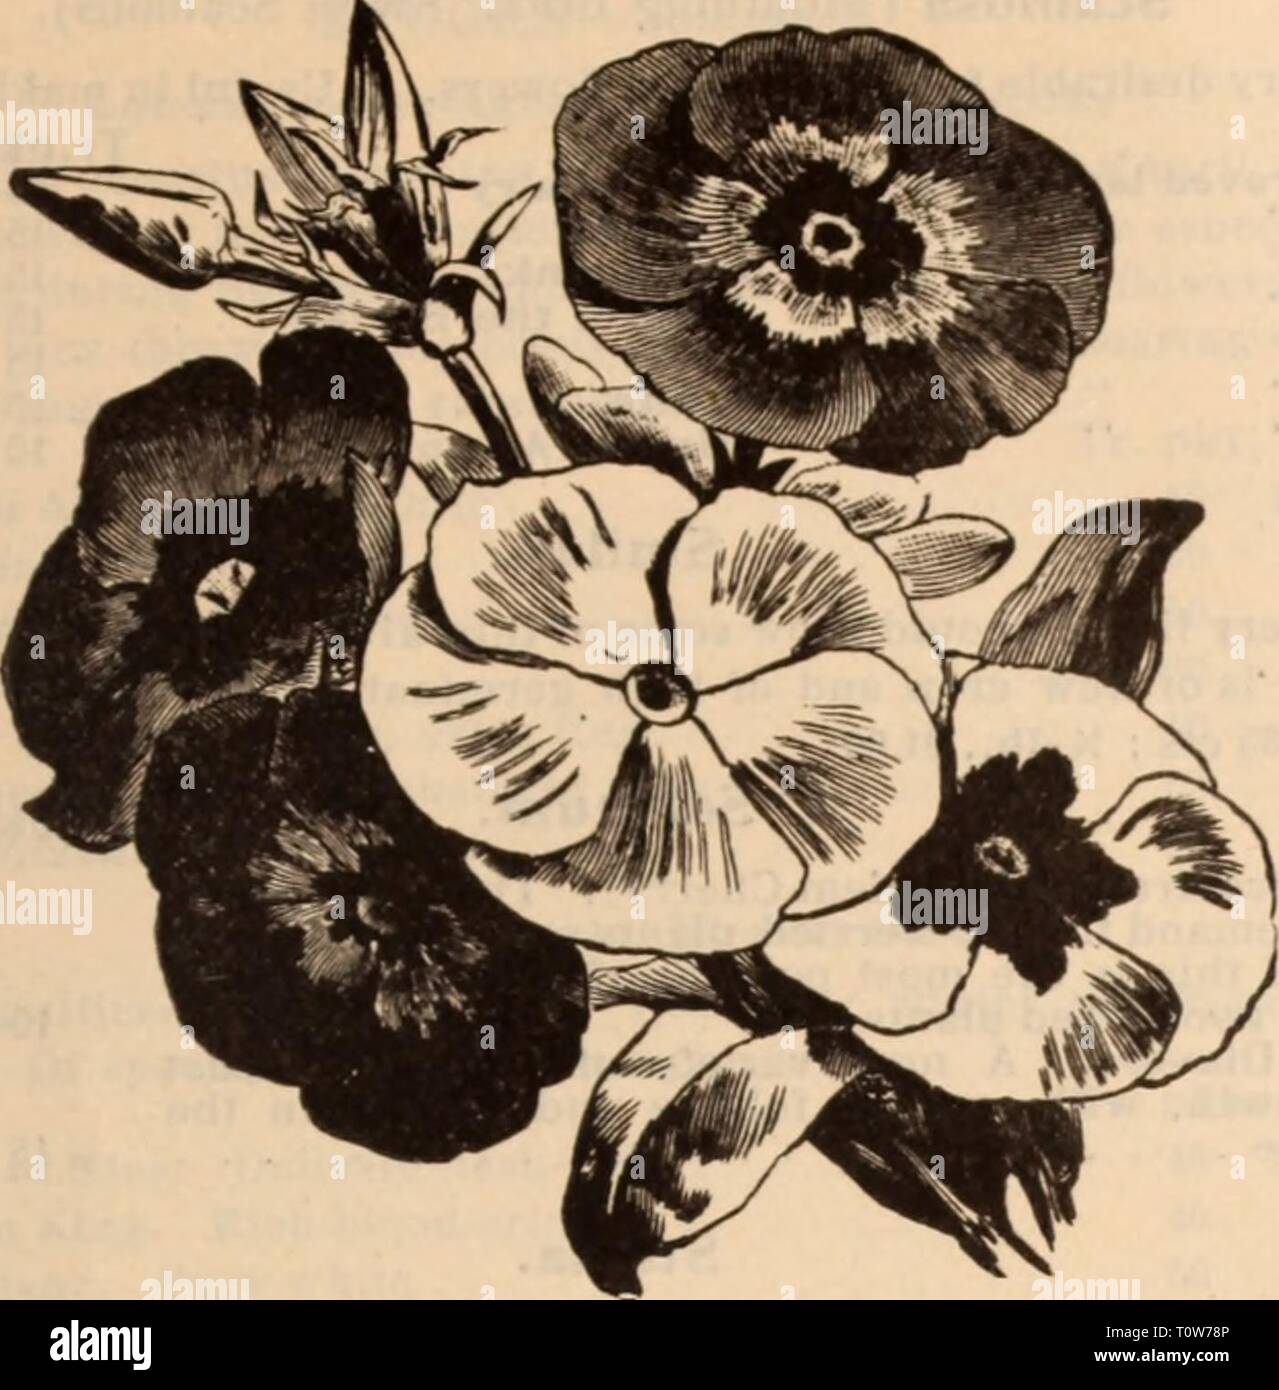 Dreer's wholesale price list  Dreer's wholesale price list / Henry A. Dreer.  dreerswholesalep1912dree Year:   HENRY A. DREER. PHILADELPHIA, PA., WHOLESALE PRICE LIST 13    PHLOX DRUMMONDI GRANDIFLORA Pentstemon Oentianoldes grandiflorus. 'Sensation.' This beautiful variety is being- largely used for bedding. It comes in a good range of colors, such as rose, red, pink, lilac, mottled and spotted. Should be handled in the same way as Petunias, Verbenas, Salvias, etc Phaselous. Multlflorus Papillo (Butterfly Runner Bean). V4-lb. 25 cts Tr. pkt. Oz. 30 $1 50 10 Phlox Drutnmondi. These are fine su Stock Photo